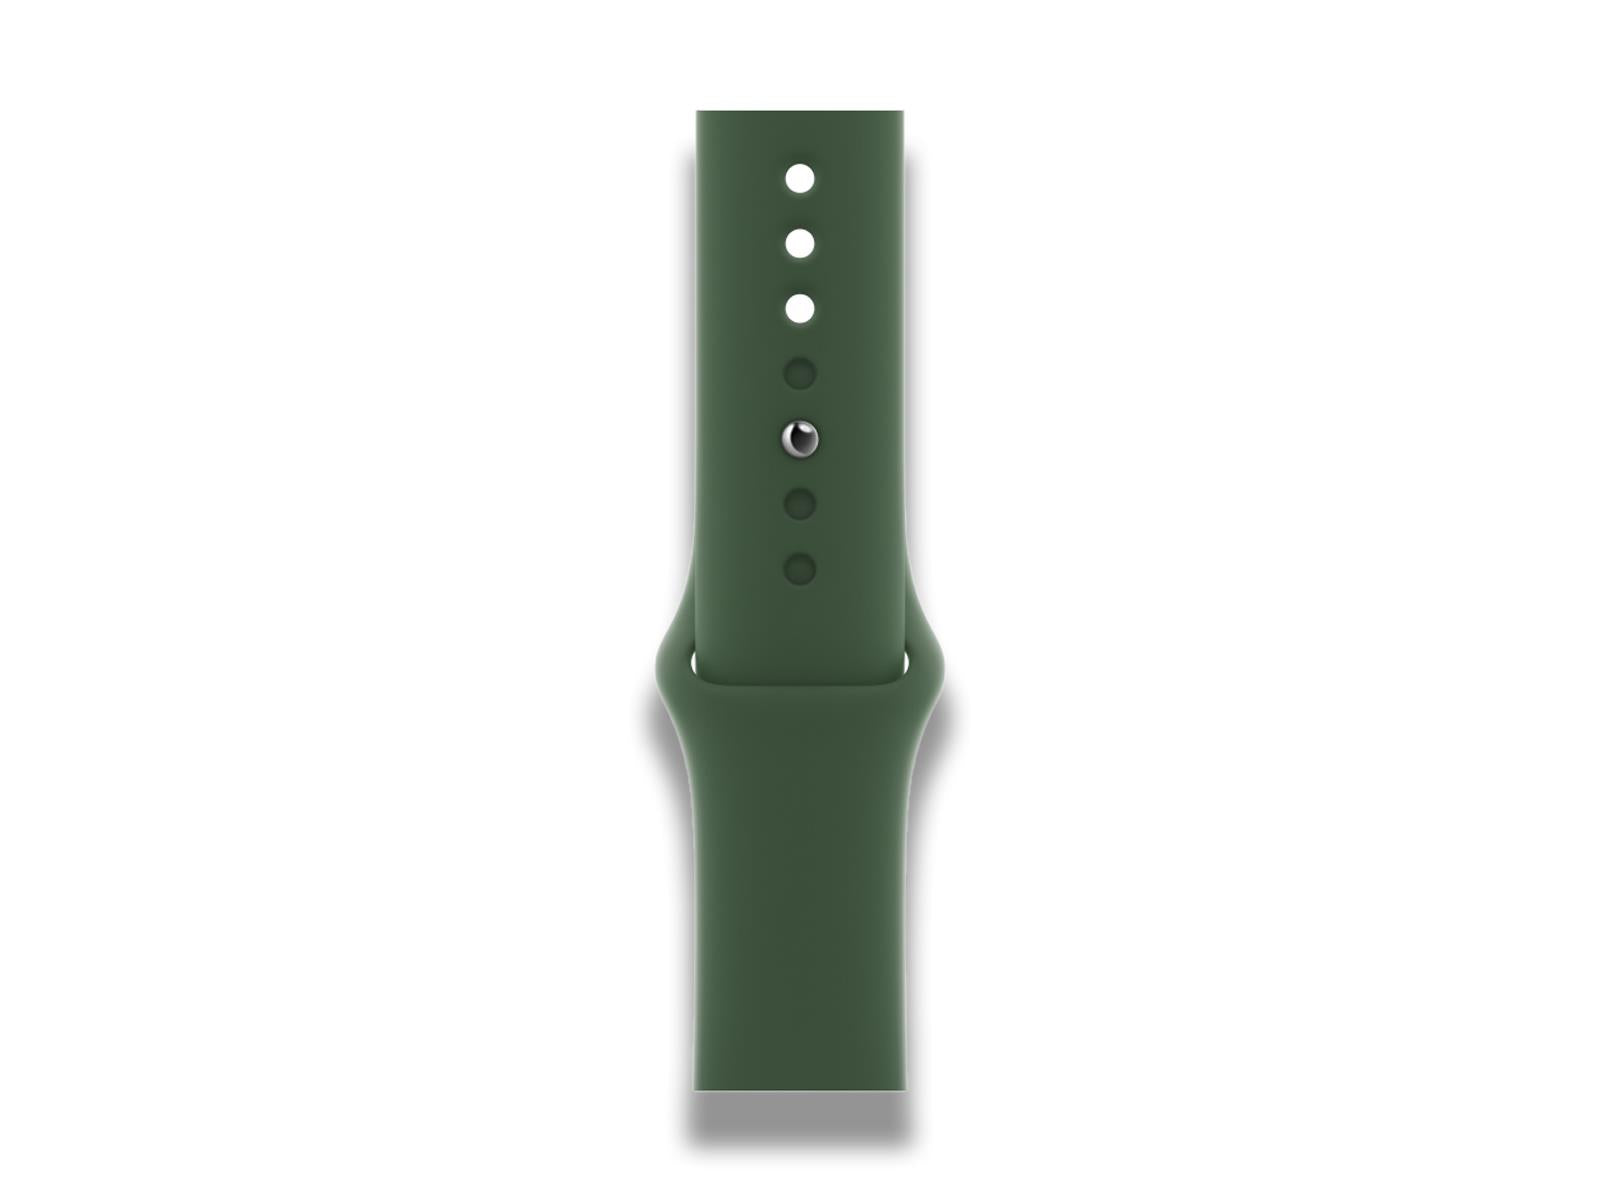 Image shows an overhead view of the clover strap on the Apple Watch Series 7